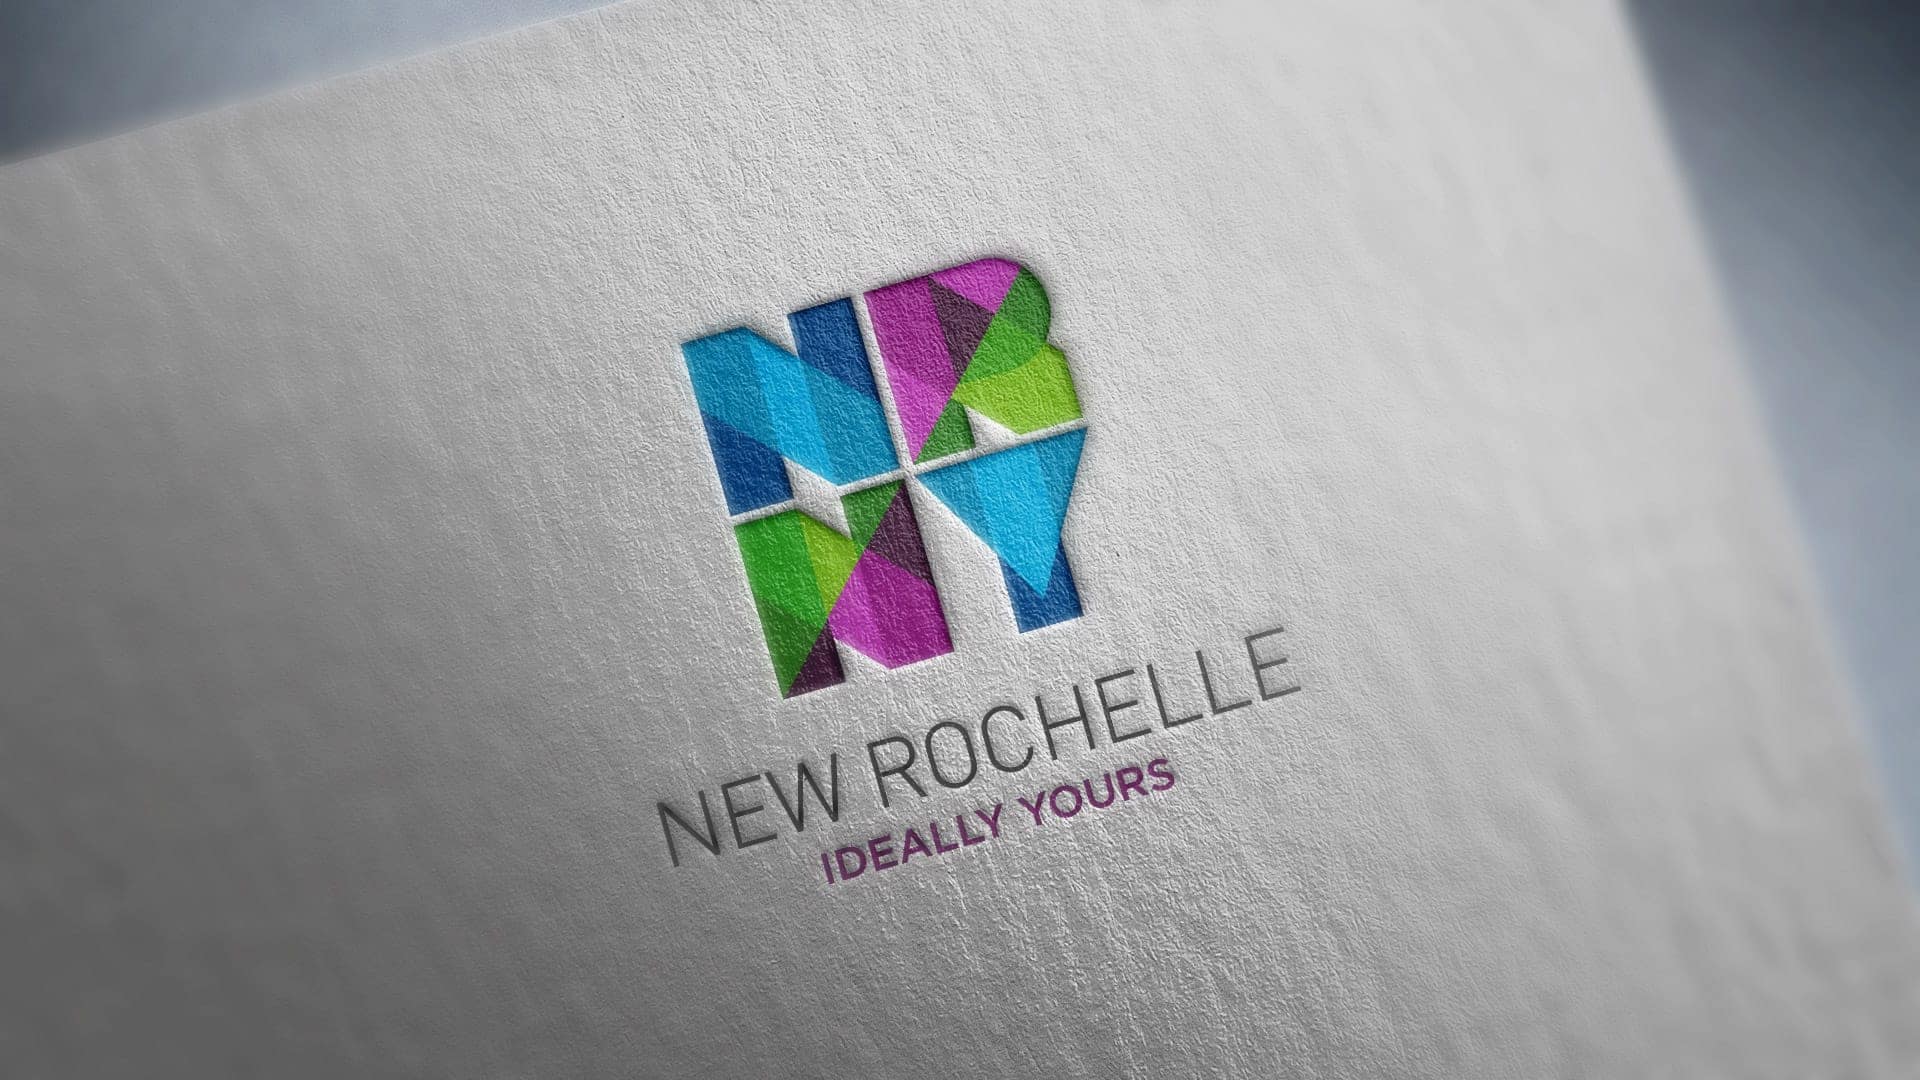 city-of-new-rochelle-ideally-yours-09